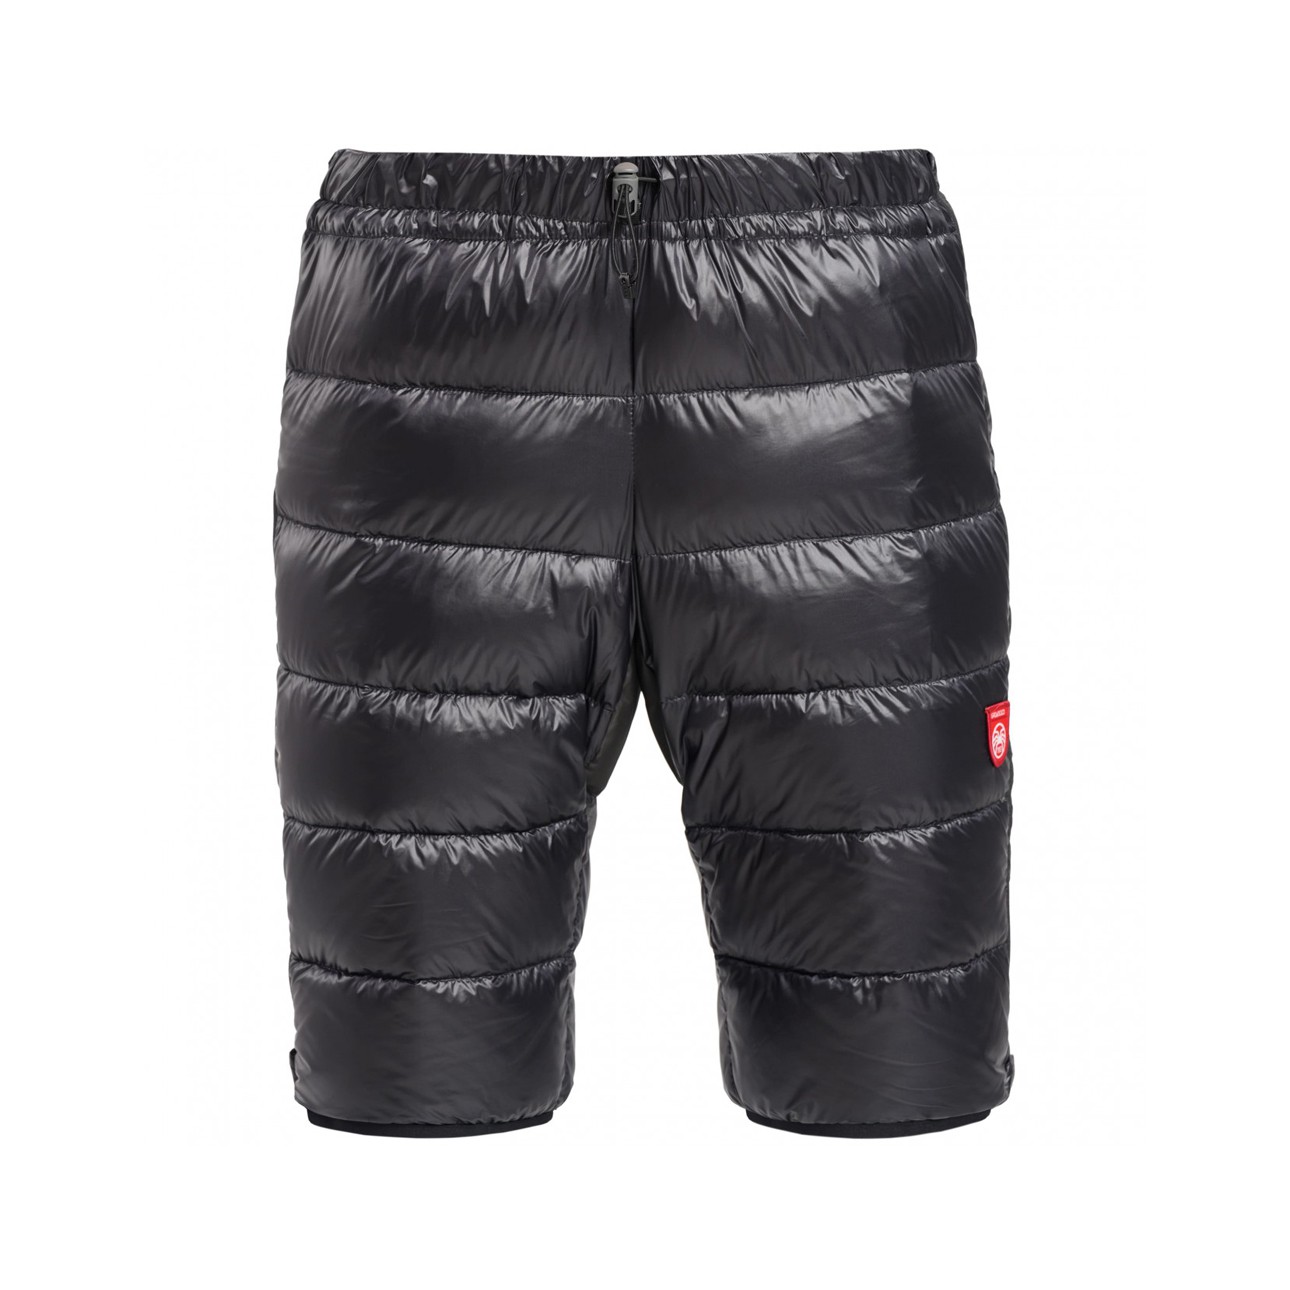 Spodenki puchowe GHOST SHORTS